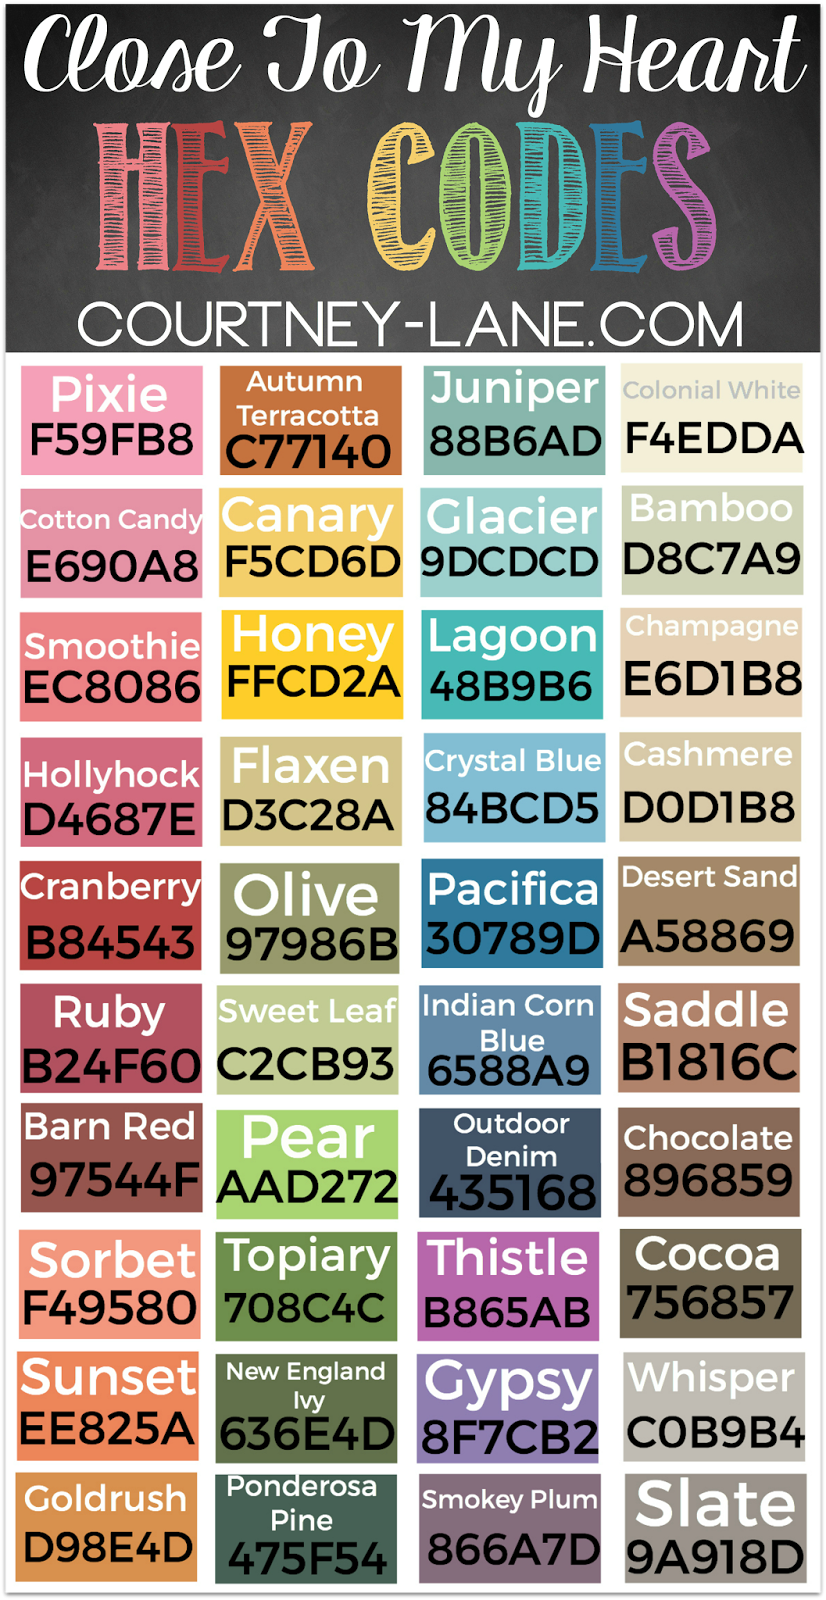 Close To My Heart HEX codes